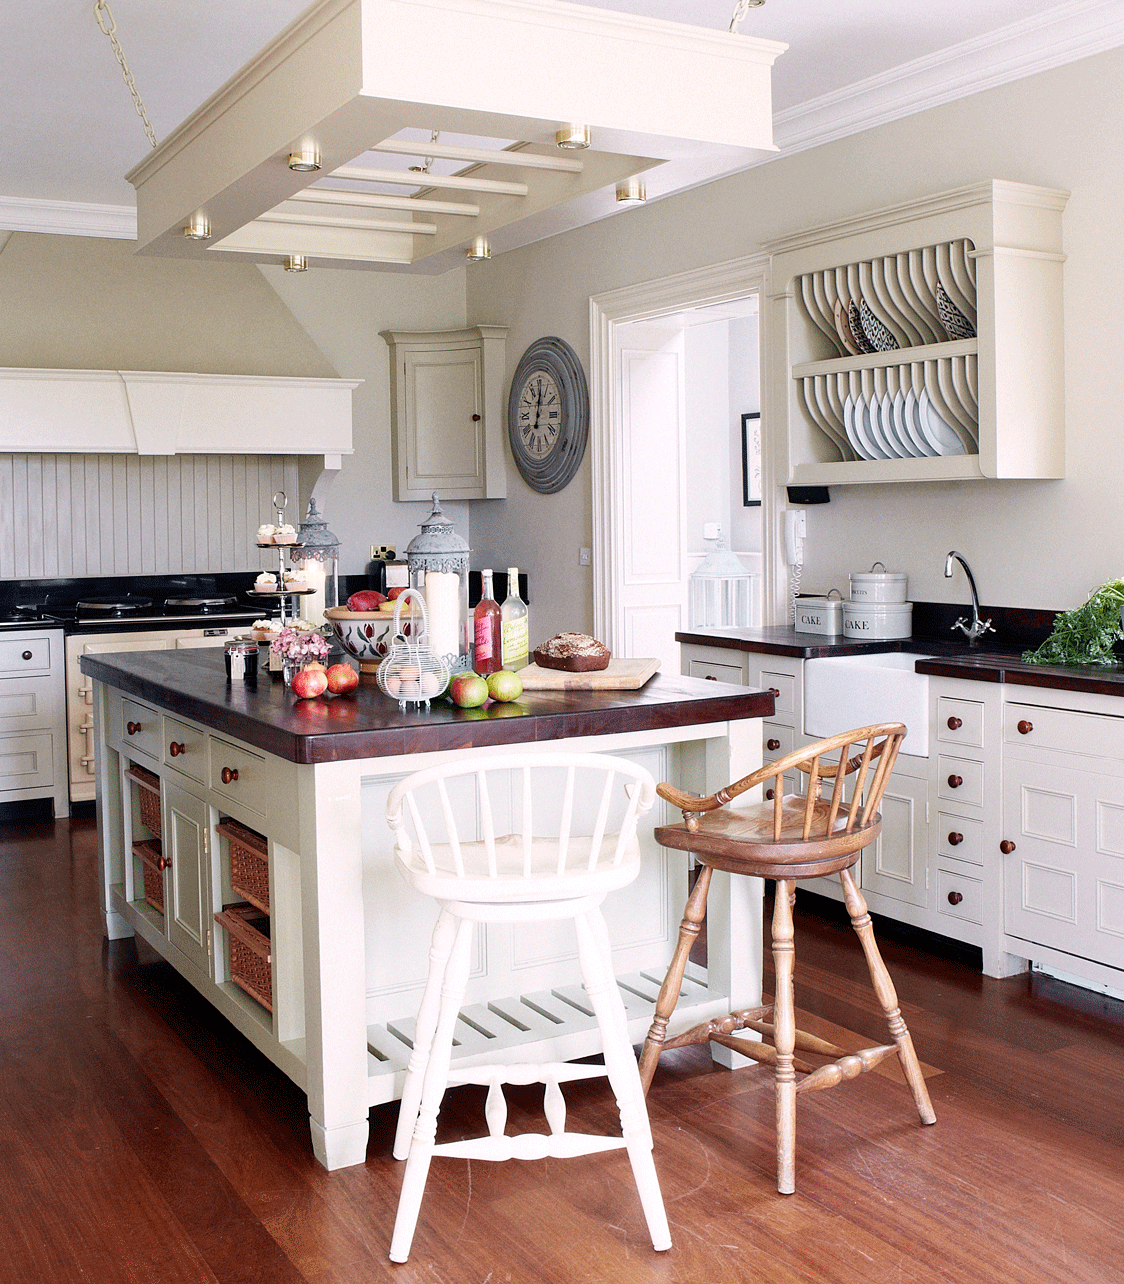 An example of portable kitchen island ideas showing a white island with mis-matched wooden bar stools